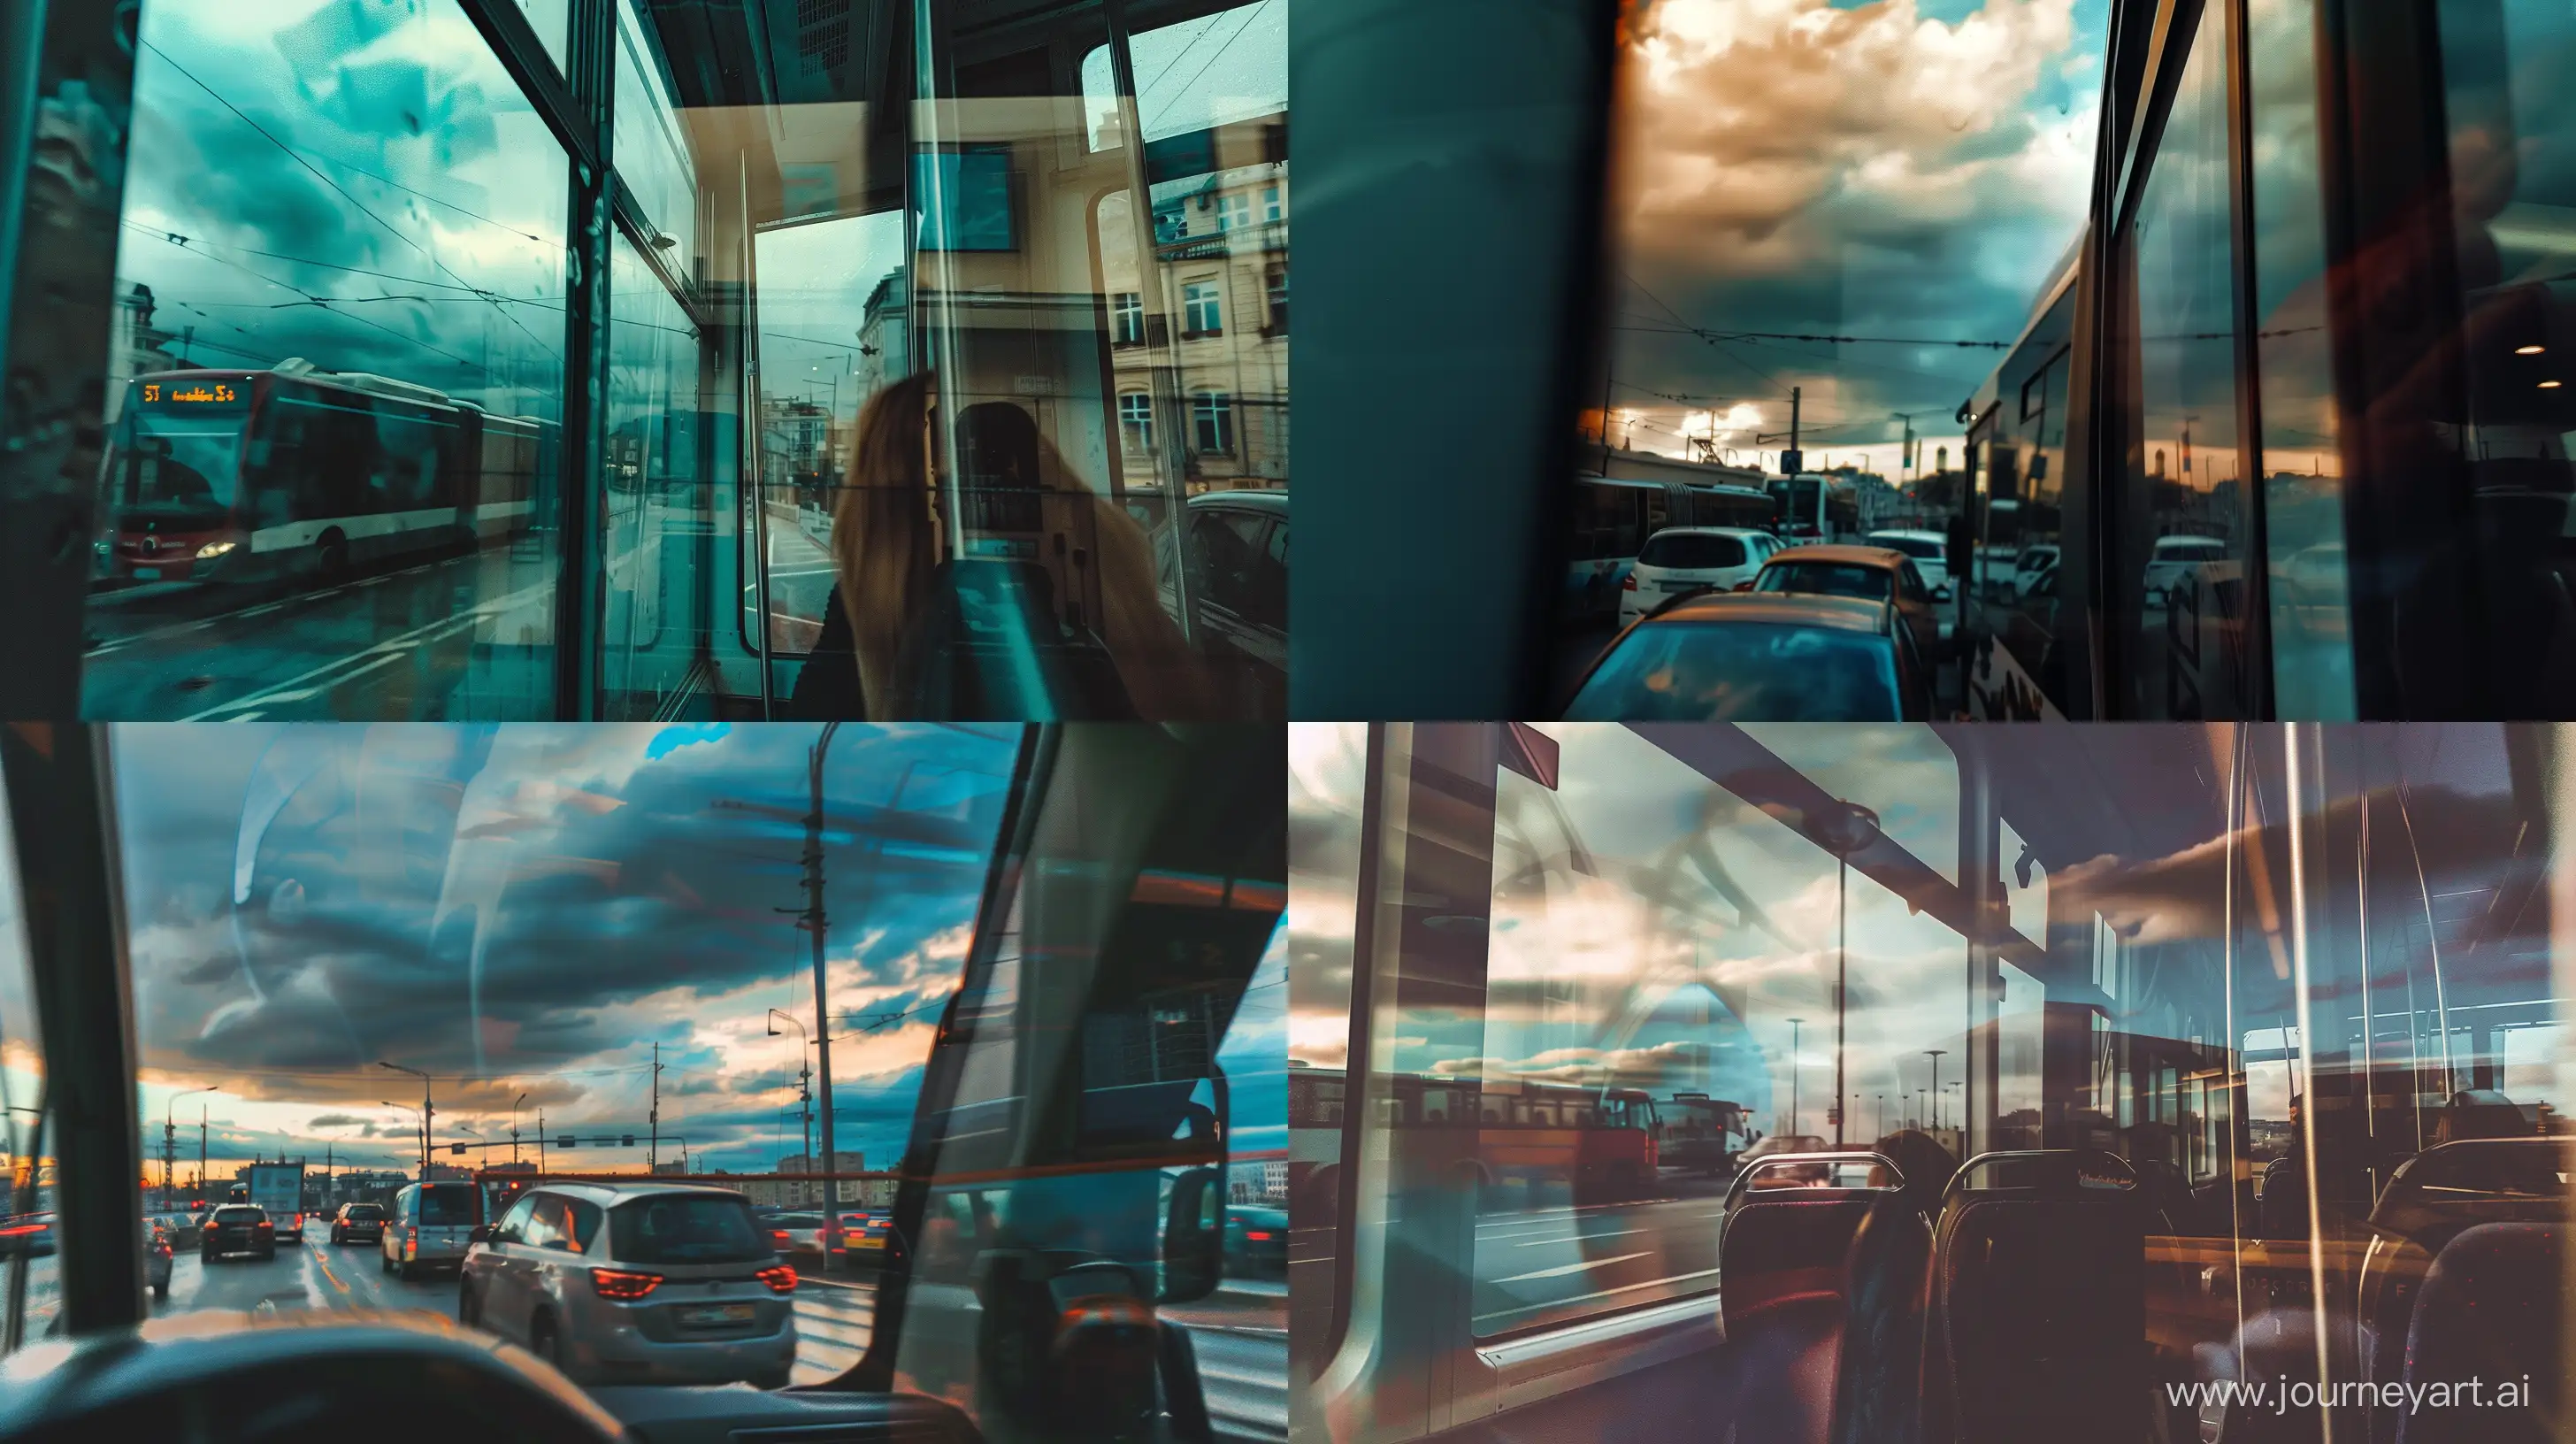 Harmonious-Surreal-Colors-Through-a-Busy-Travellic-Window